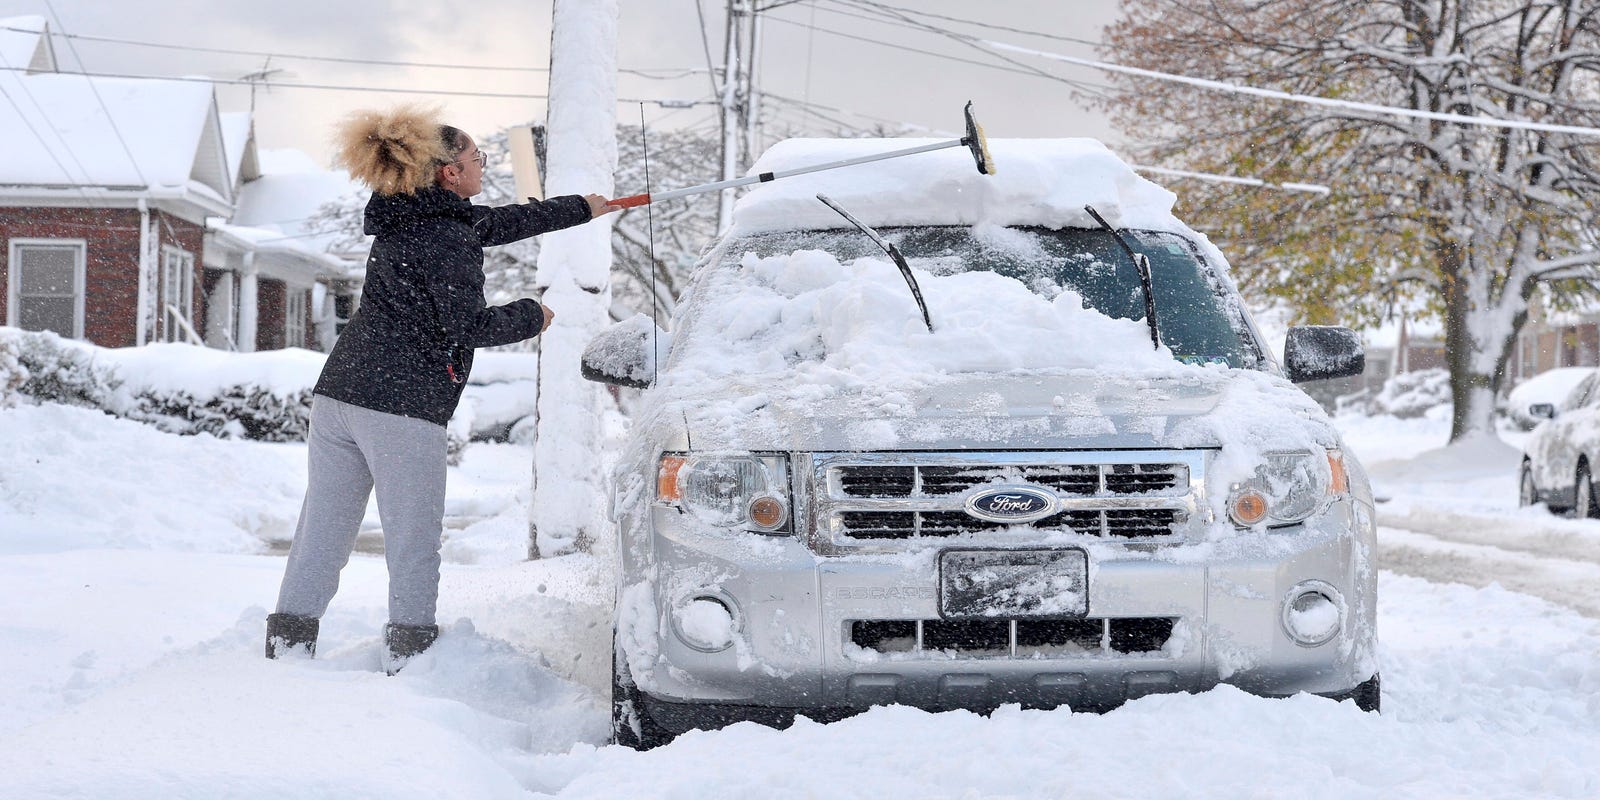 Want to start your car to heat it up? Here's why doing so in winter weather may be a bad idea